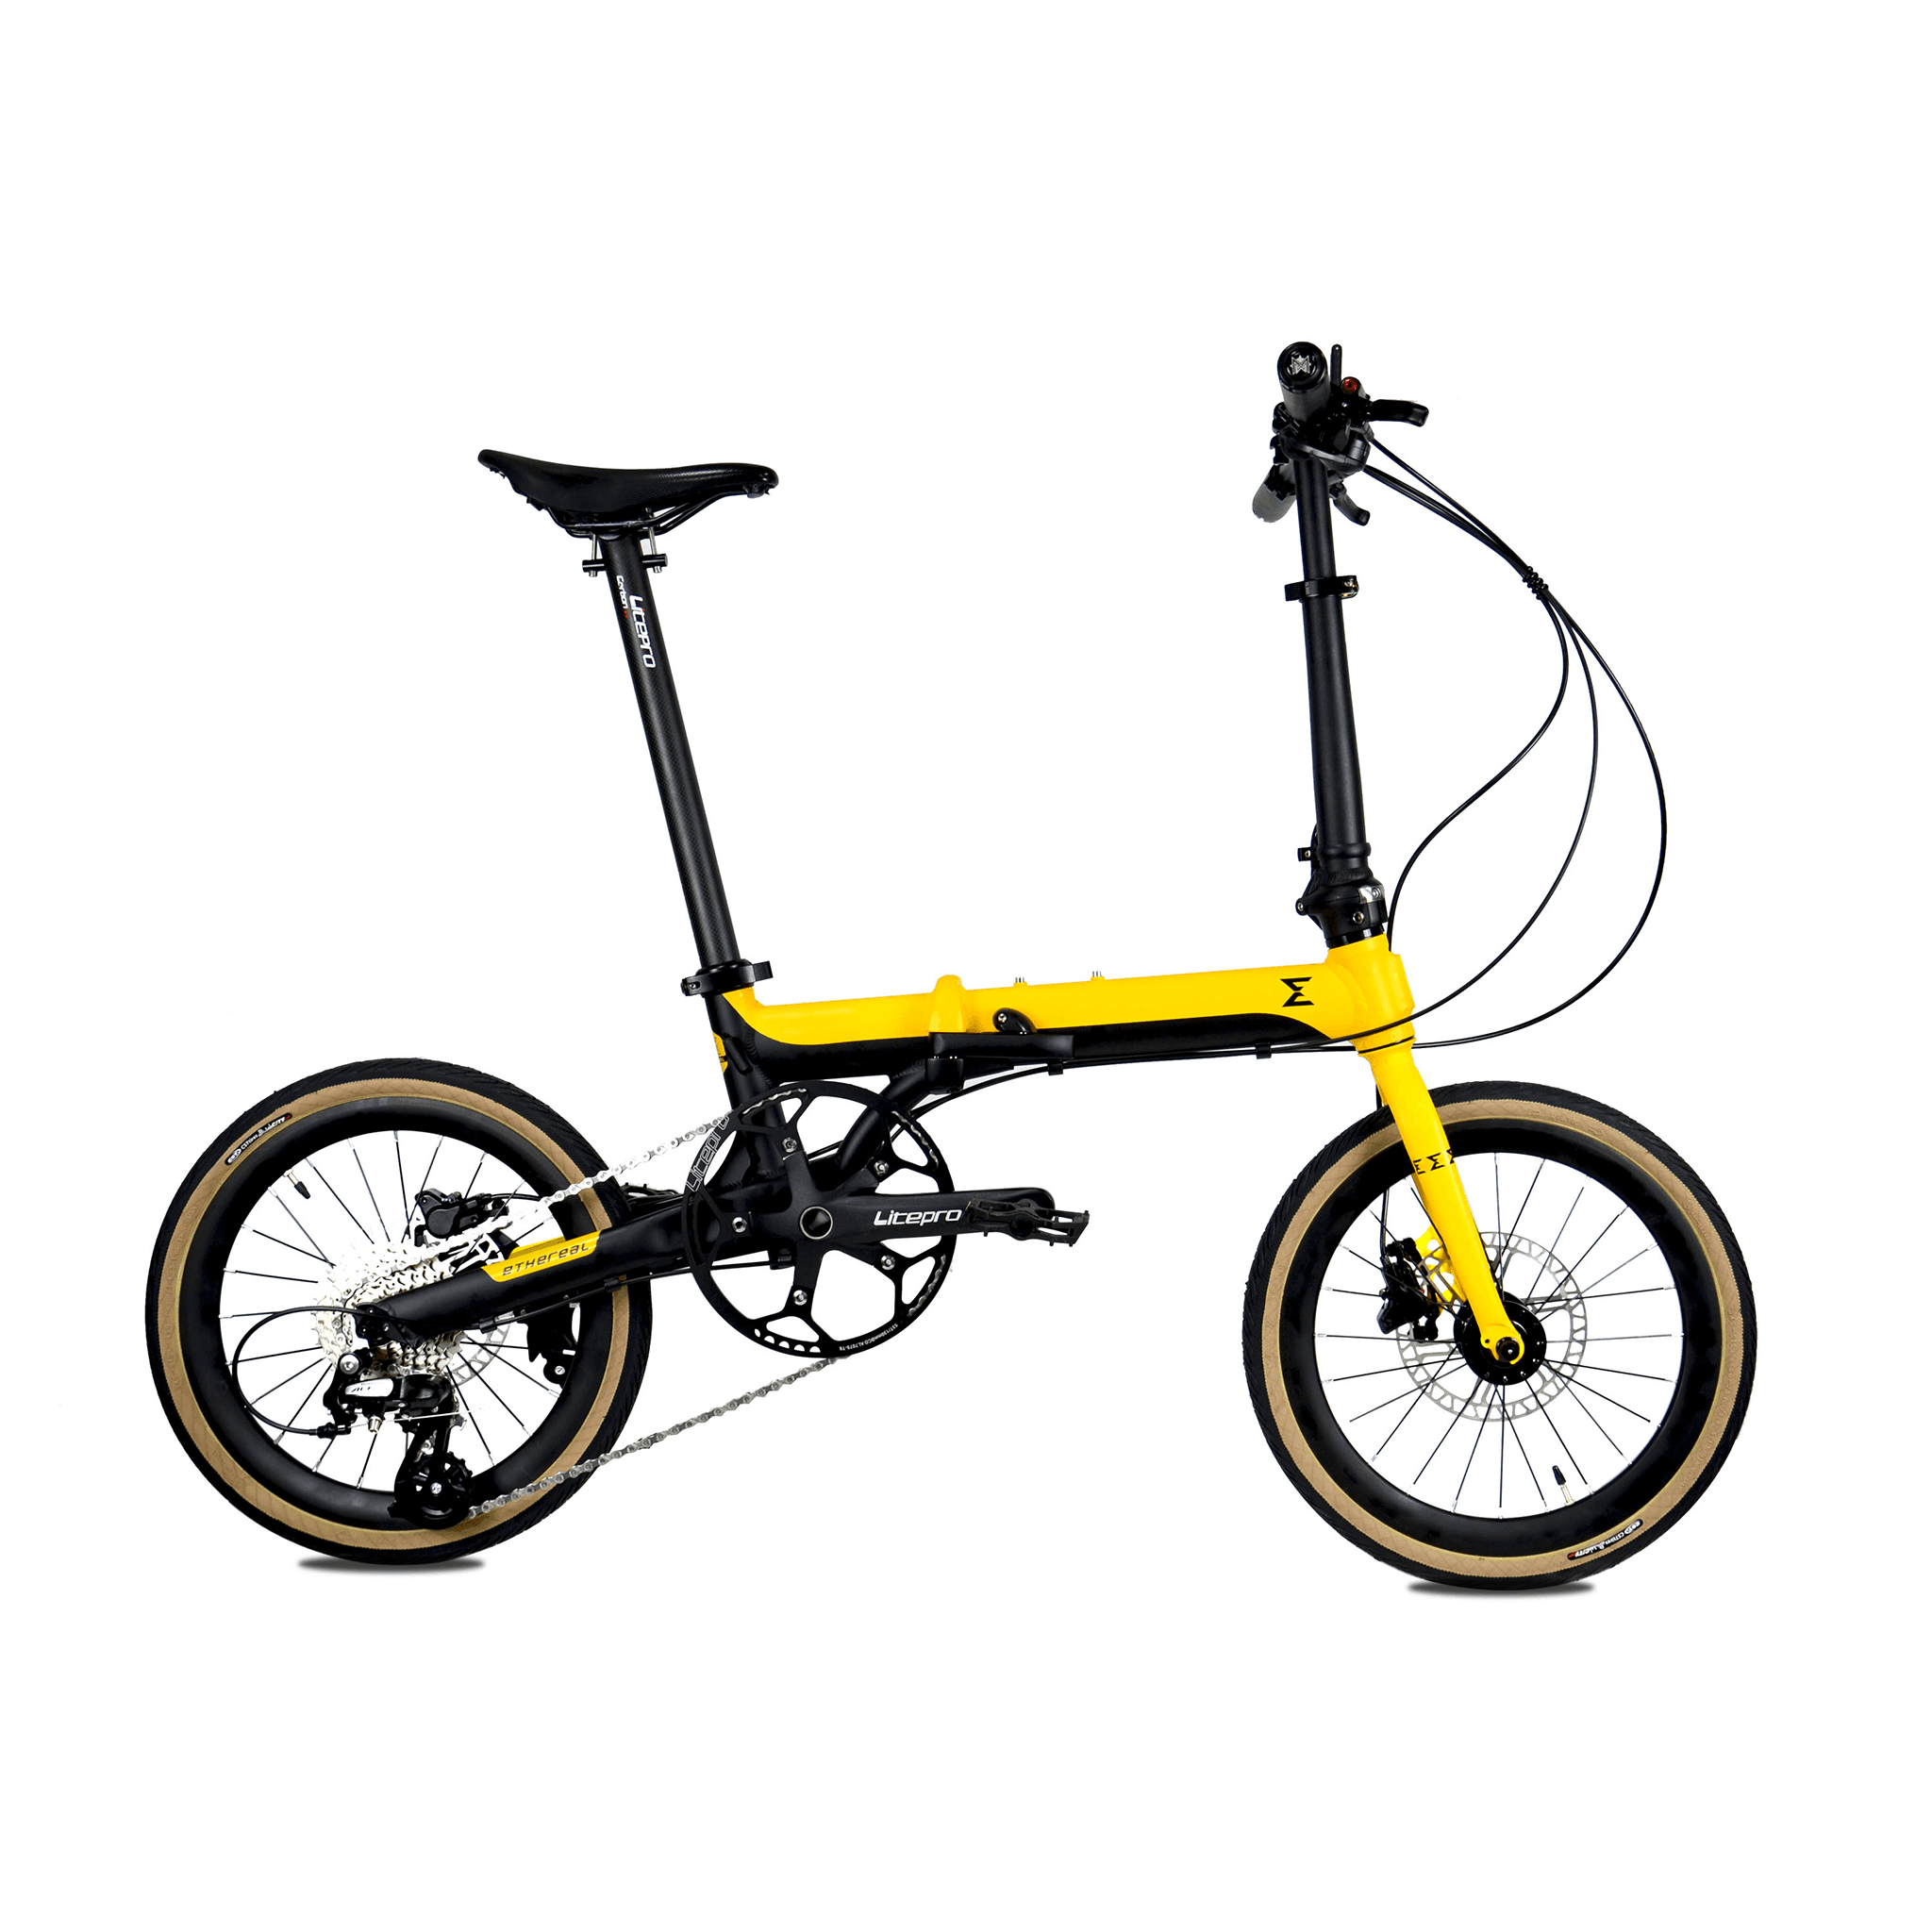 Ethereal Compact D8 Lightweight Folding Bike In Singapore Free Lifetime Servicing And 5 Year